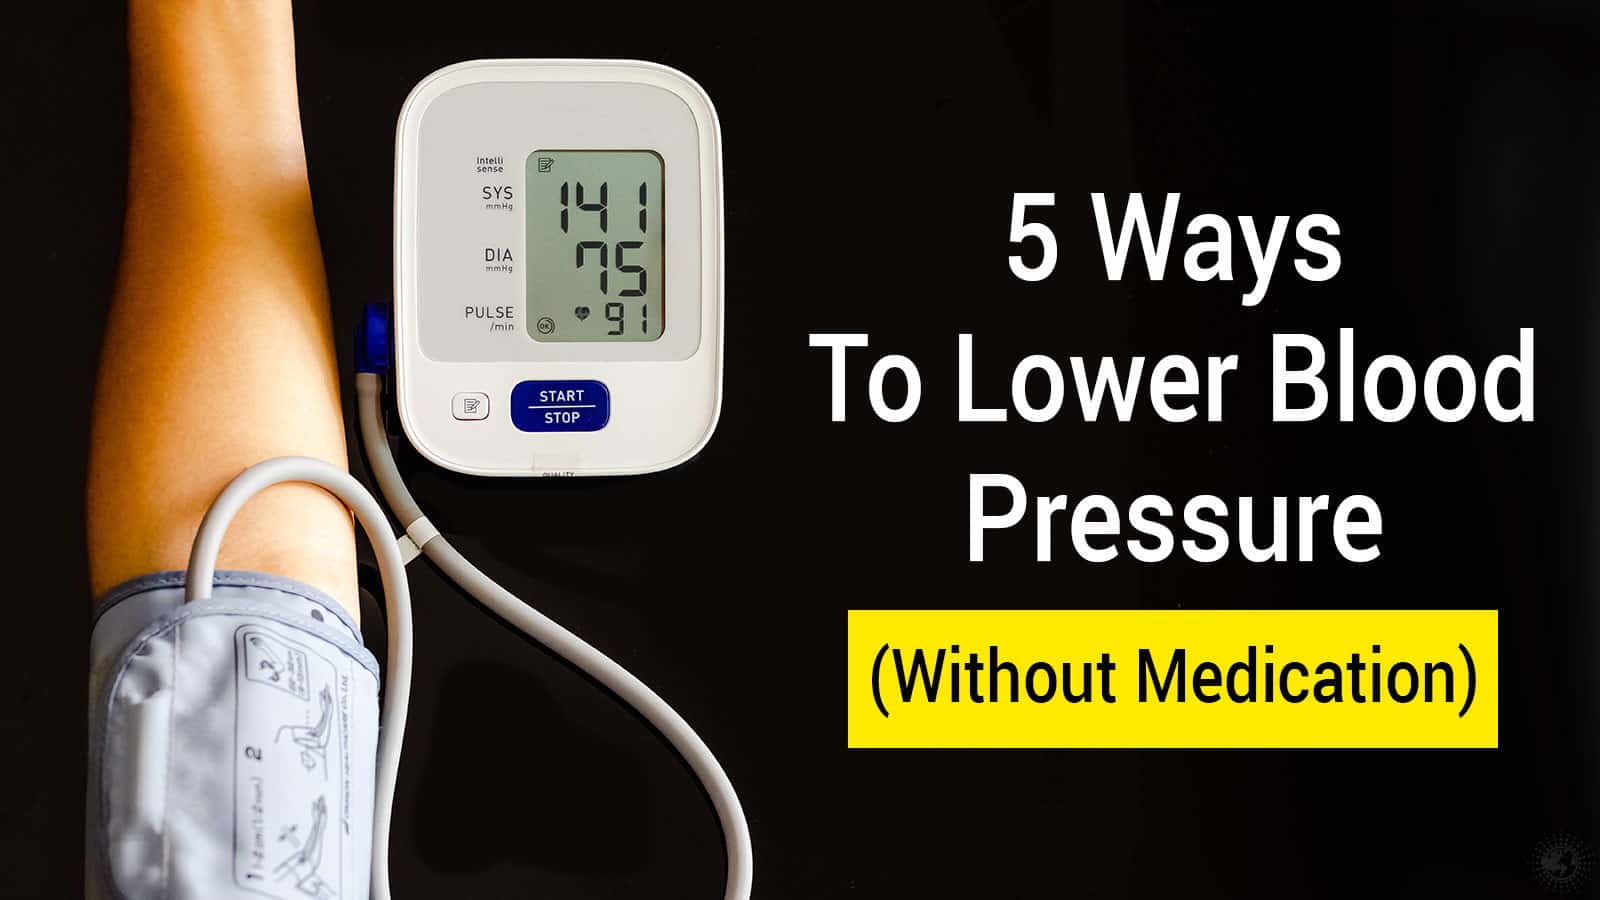 5 Ways To Lower Blood Pressure (Without Medication)